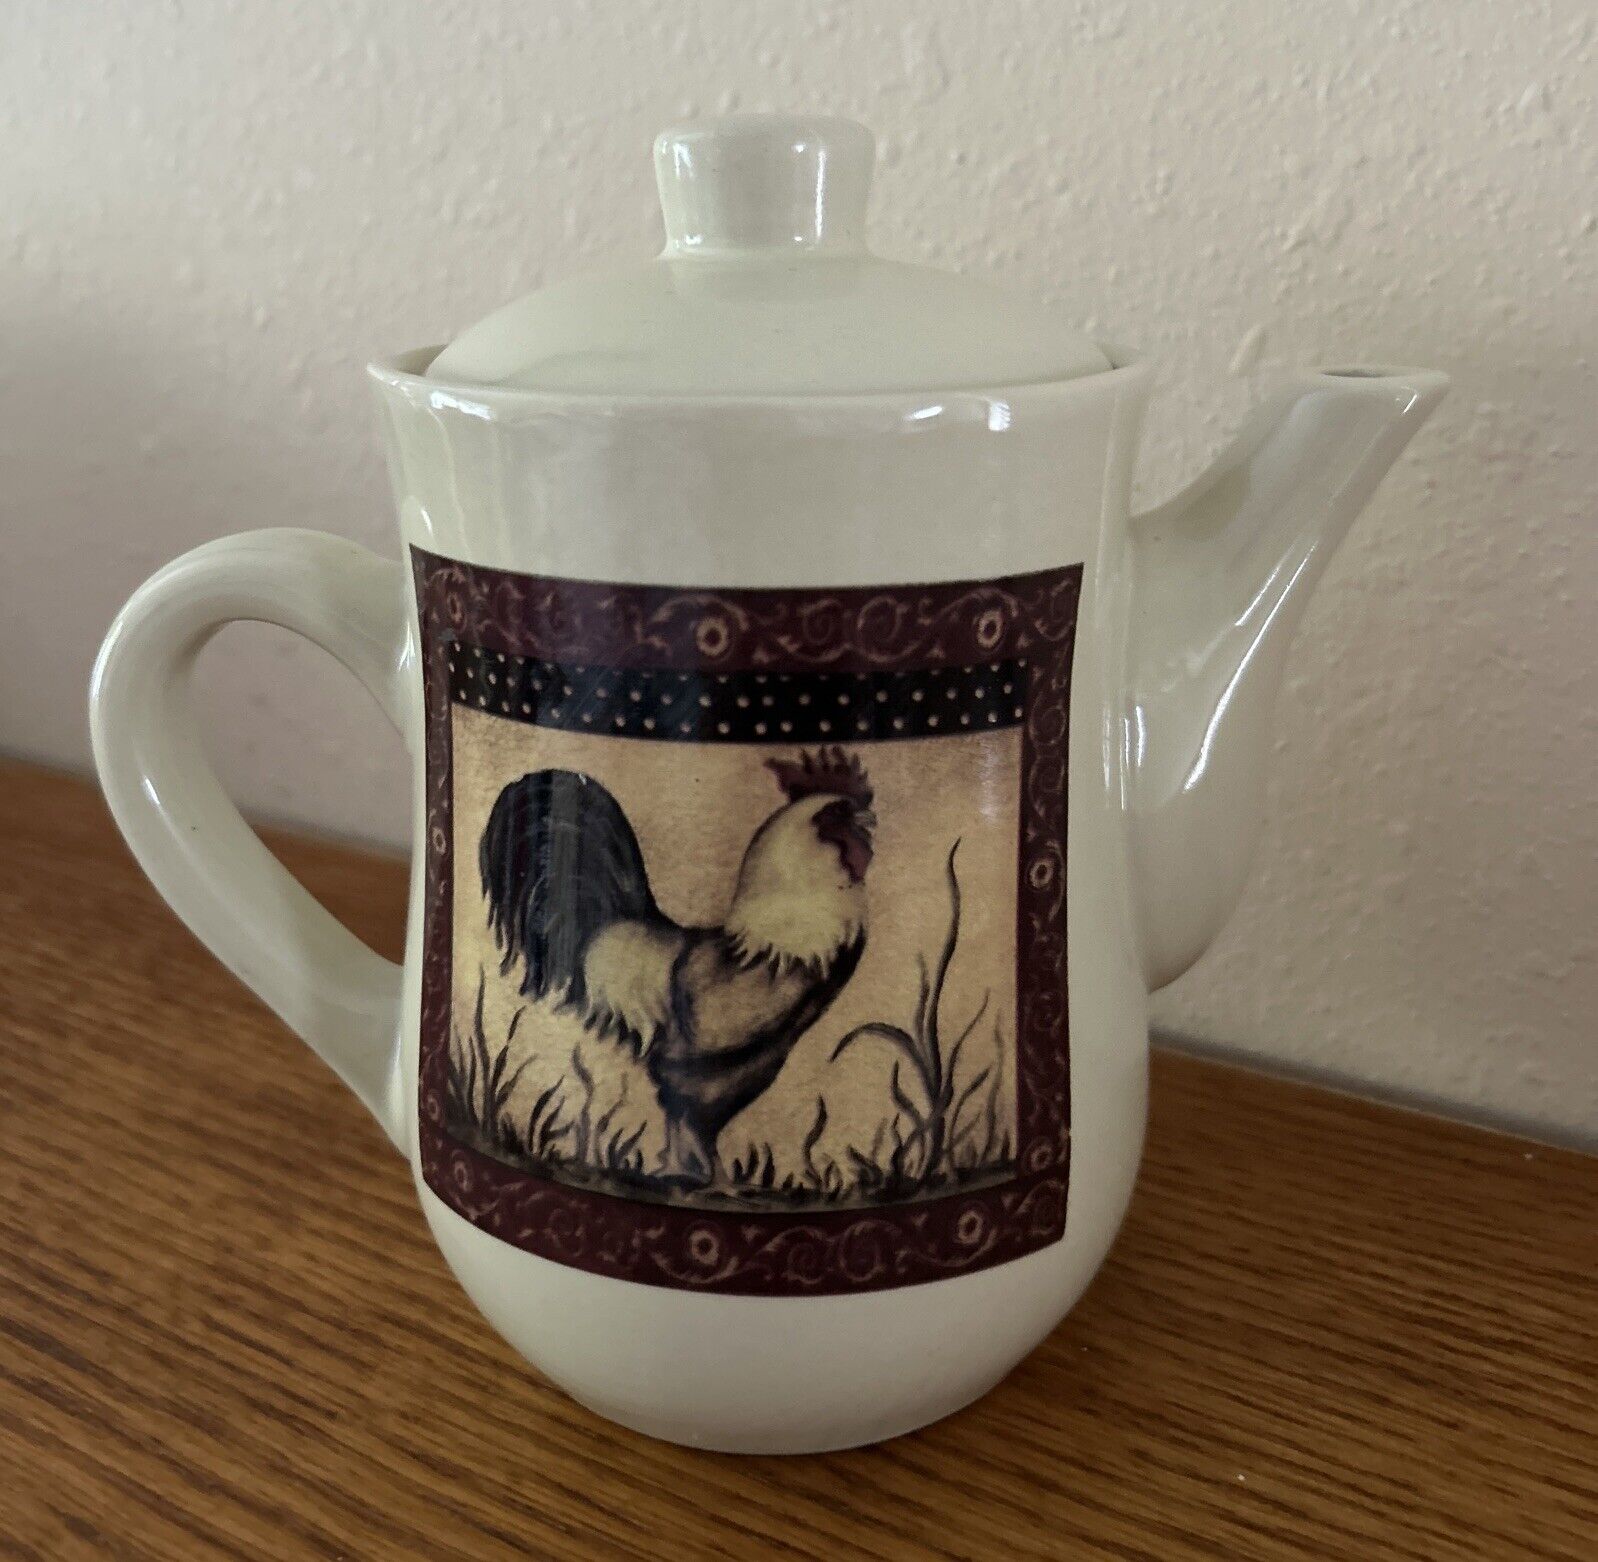 Small Vintage Bay Island Rooster Teapot 2 Cup, Very Nice